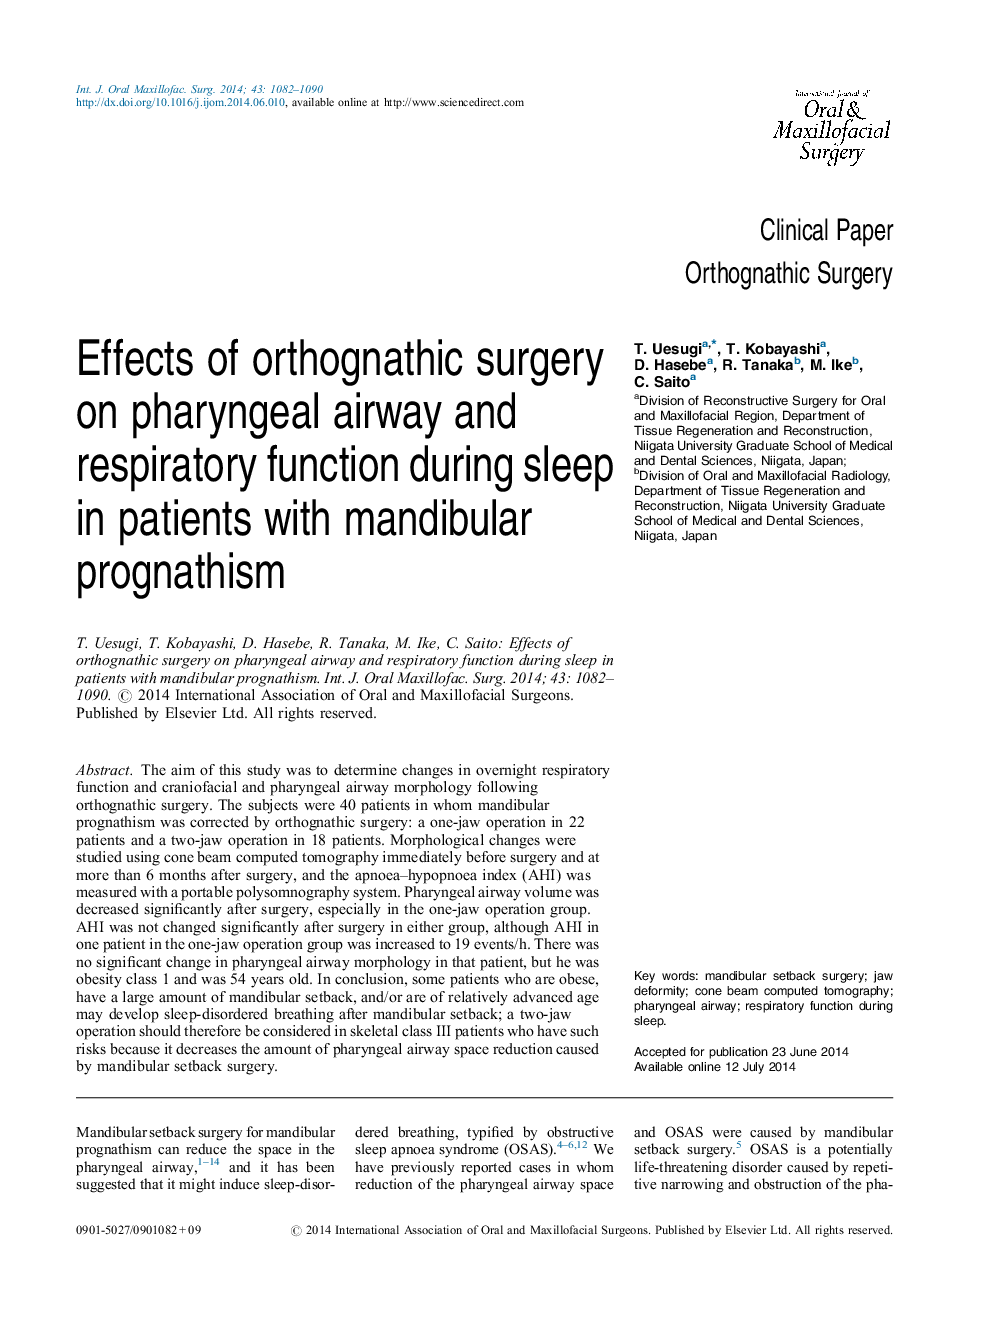 Effects of orthognathic surgery on pharyngeal airway and respiratory function during sleep in patients with mandibular prognathism